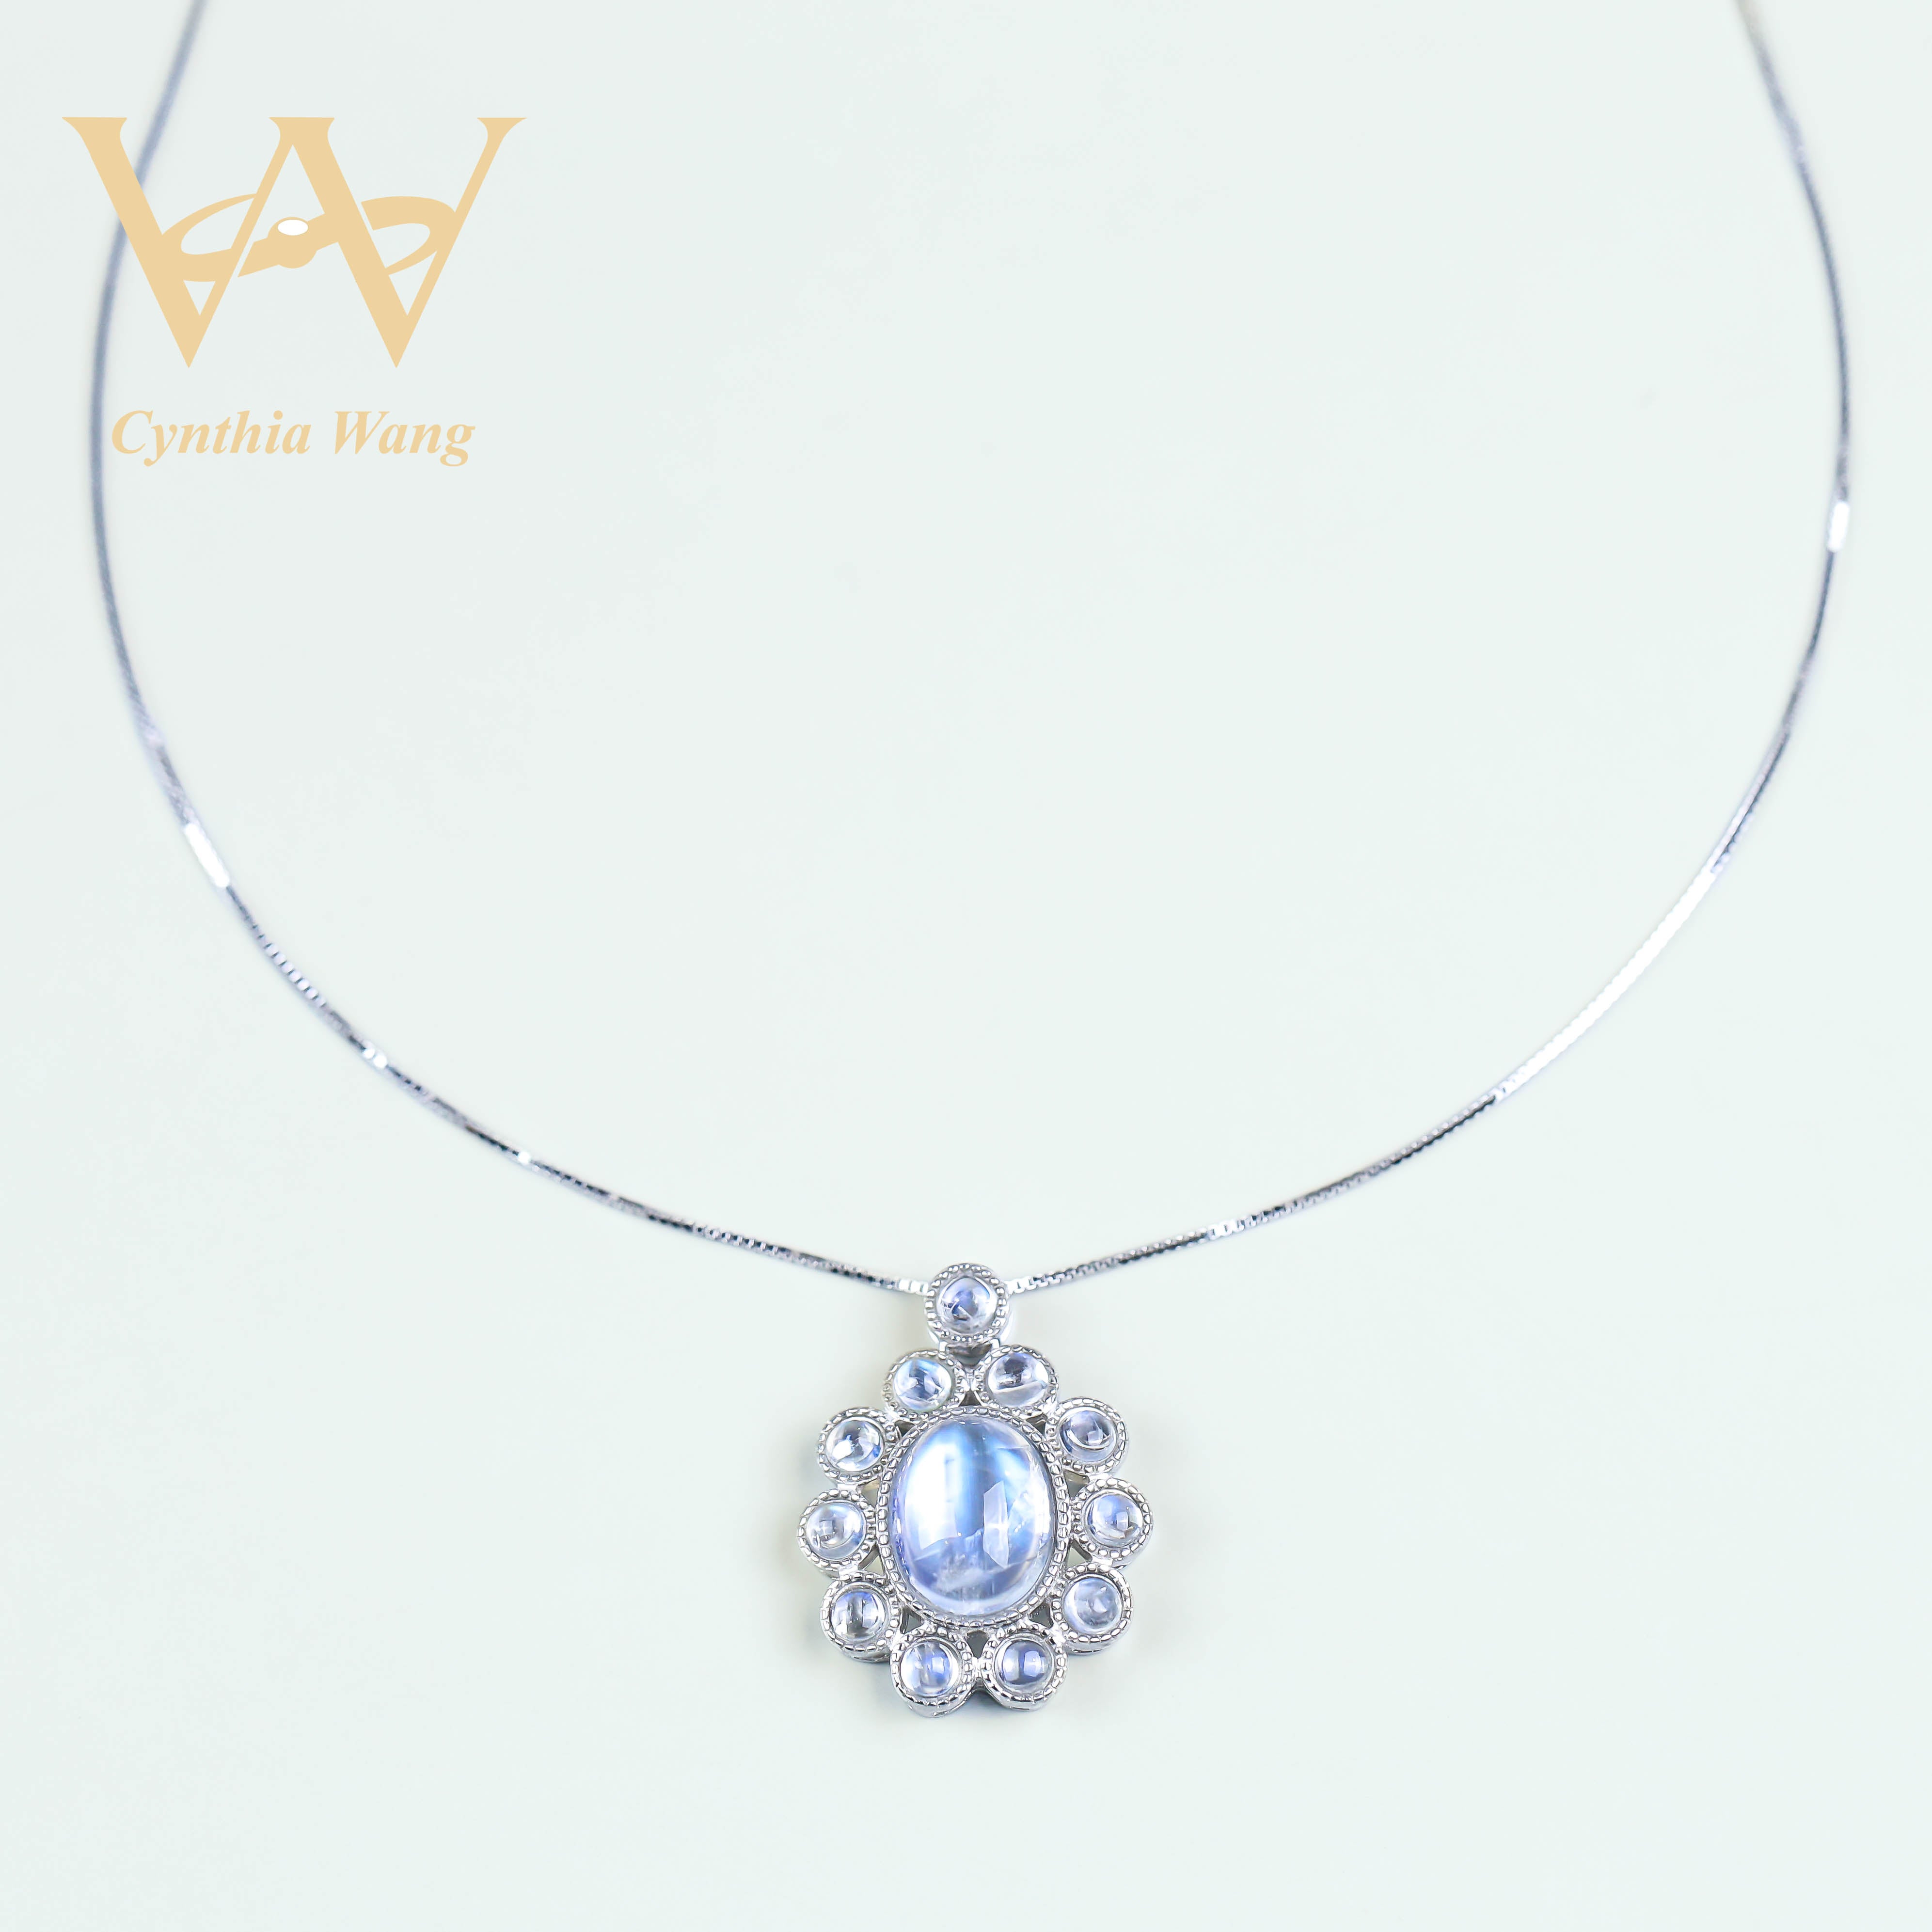 'Enter The Dream' Moonstone Necklace